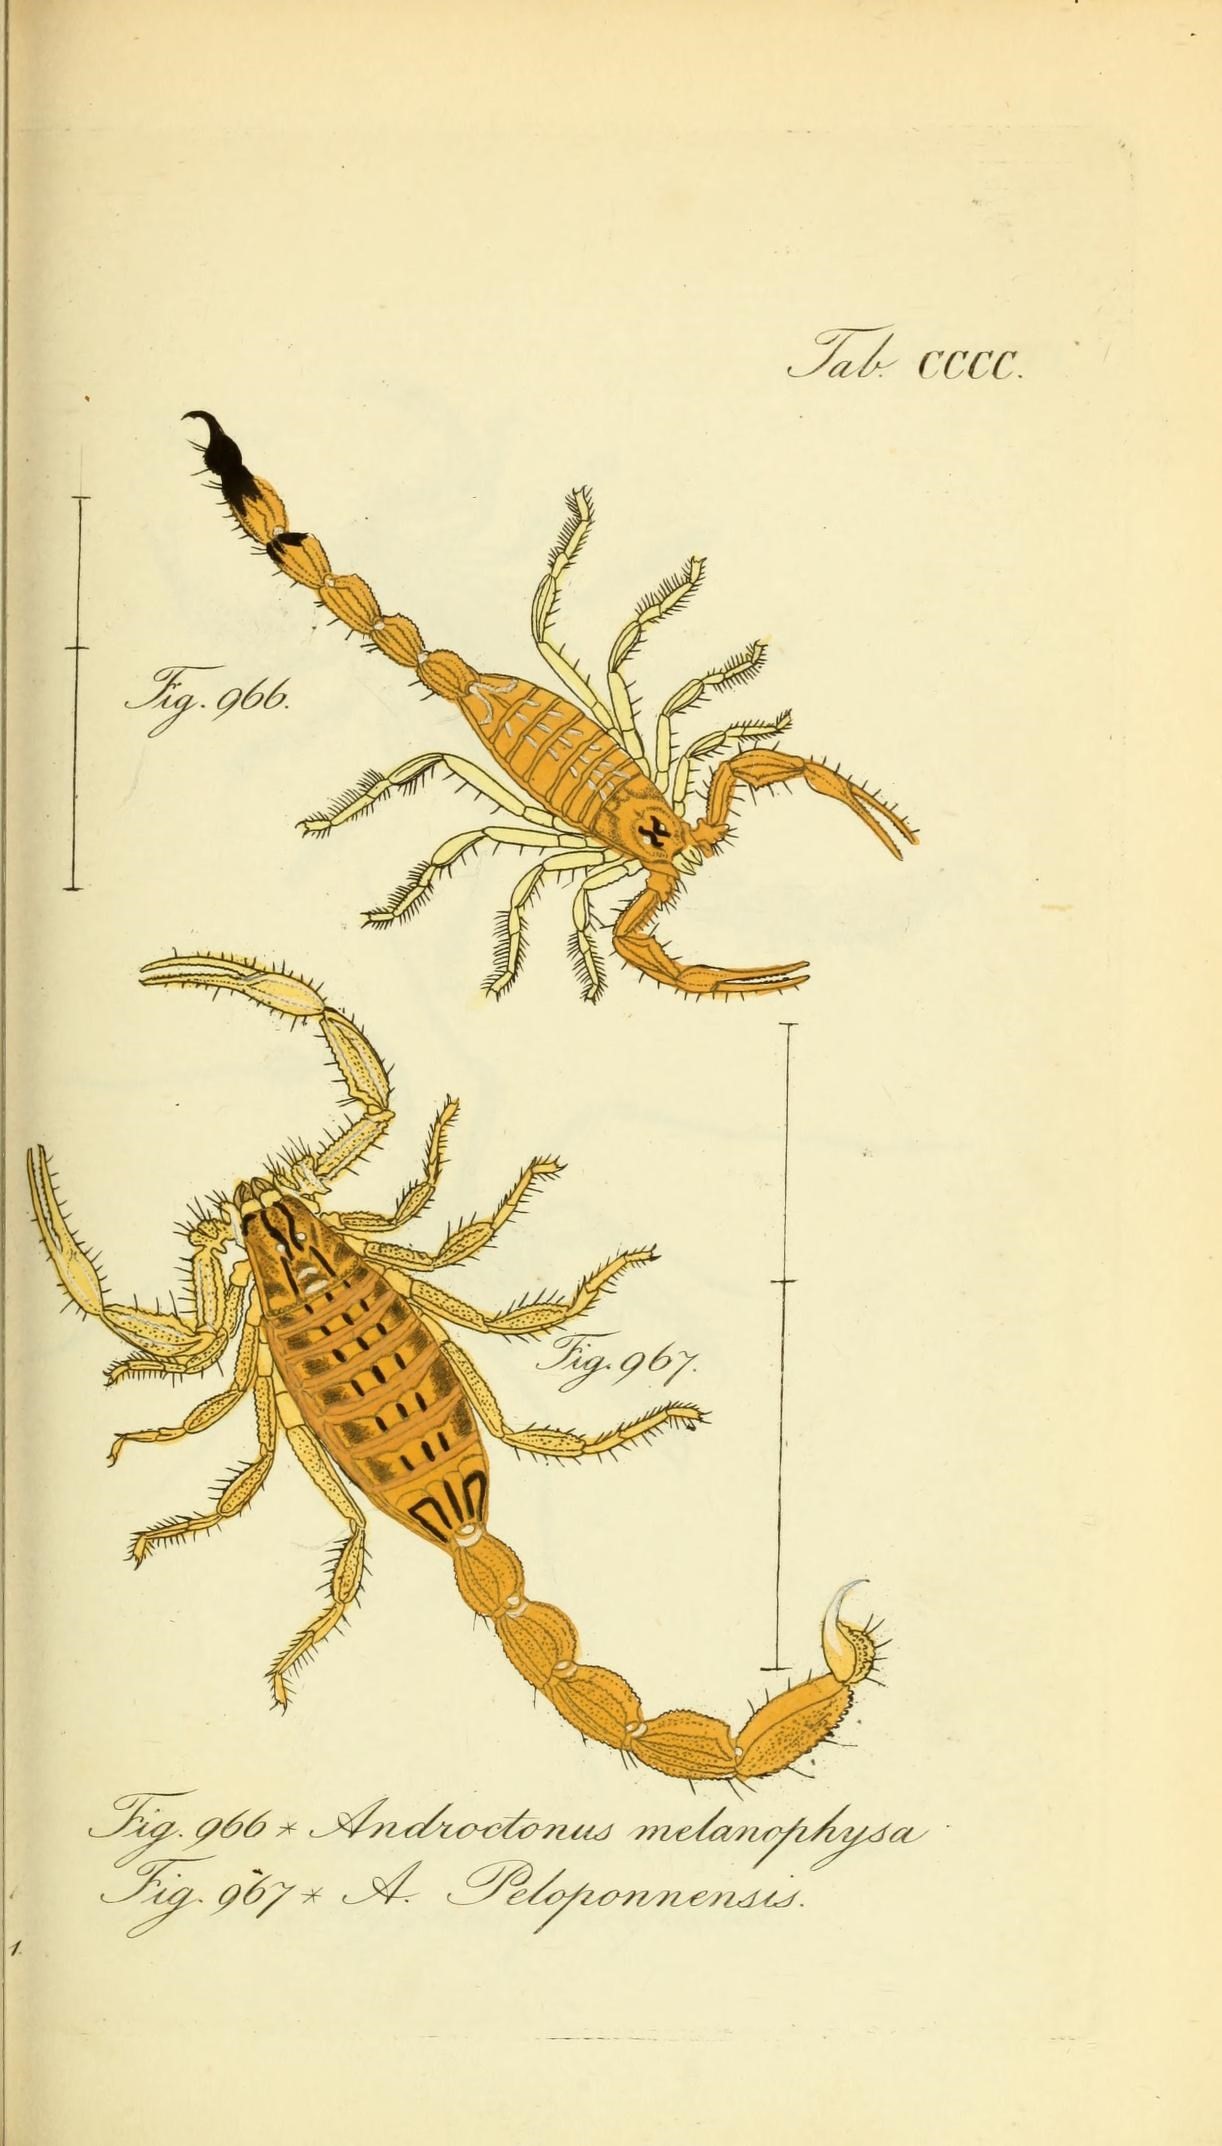 a drawing of some types of insects and scorpions